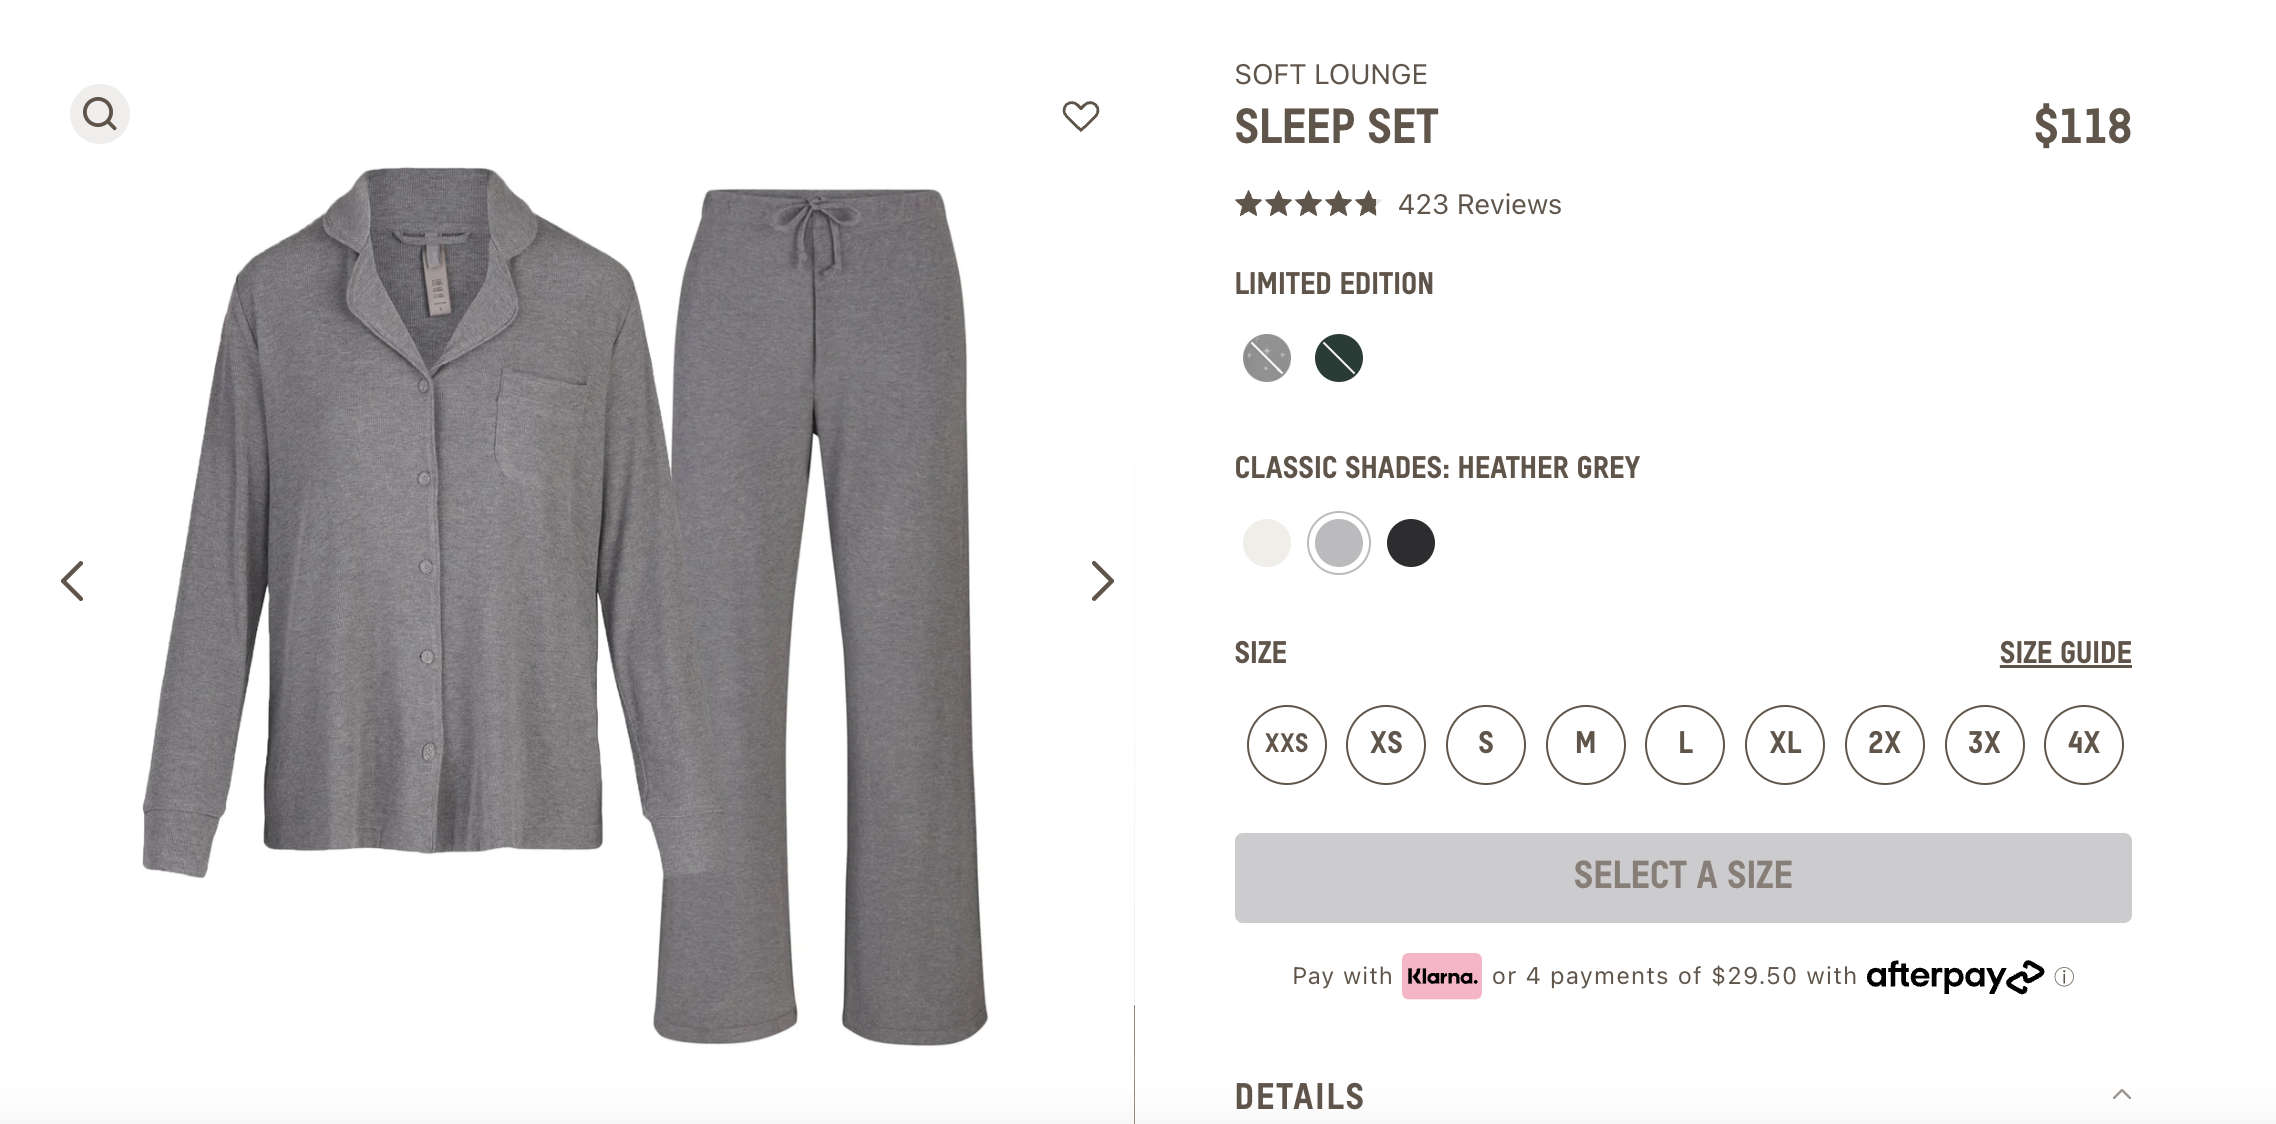 Fashion fan raves about viral Penneys pyjamas that's a dupe for Skims - LMFM